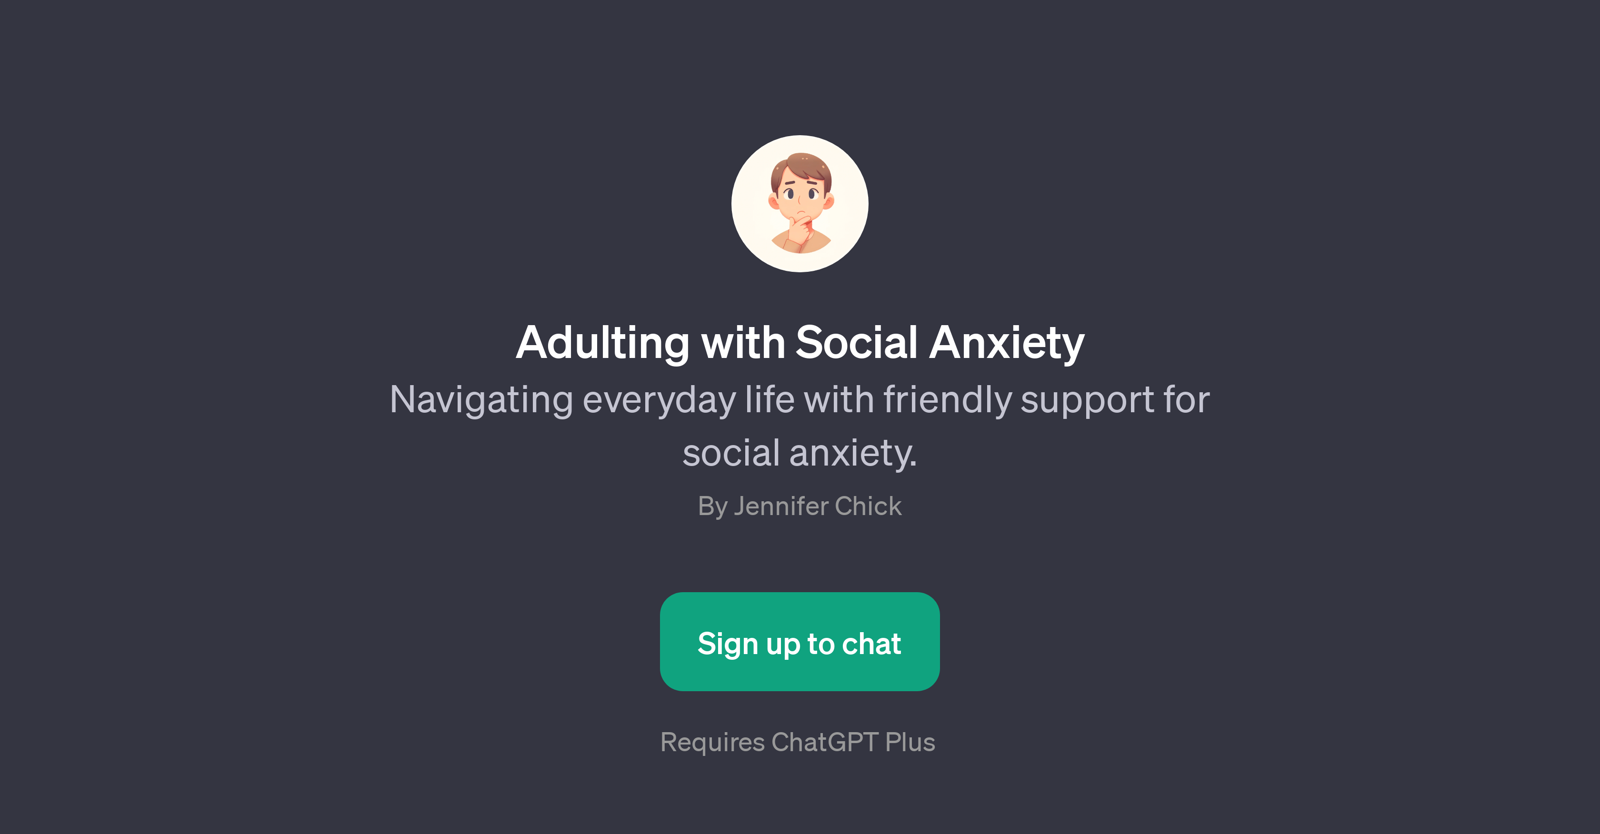 Adulting with Social Anxiety website